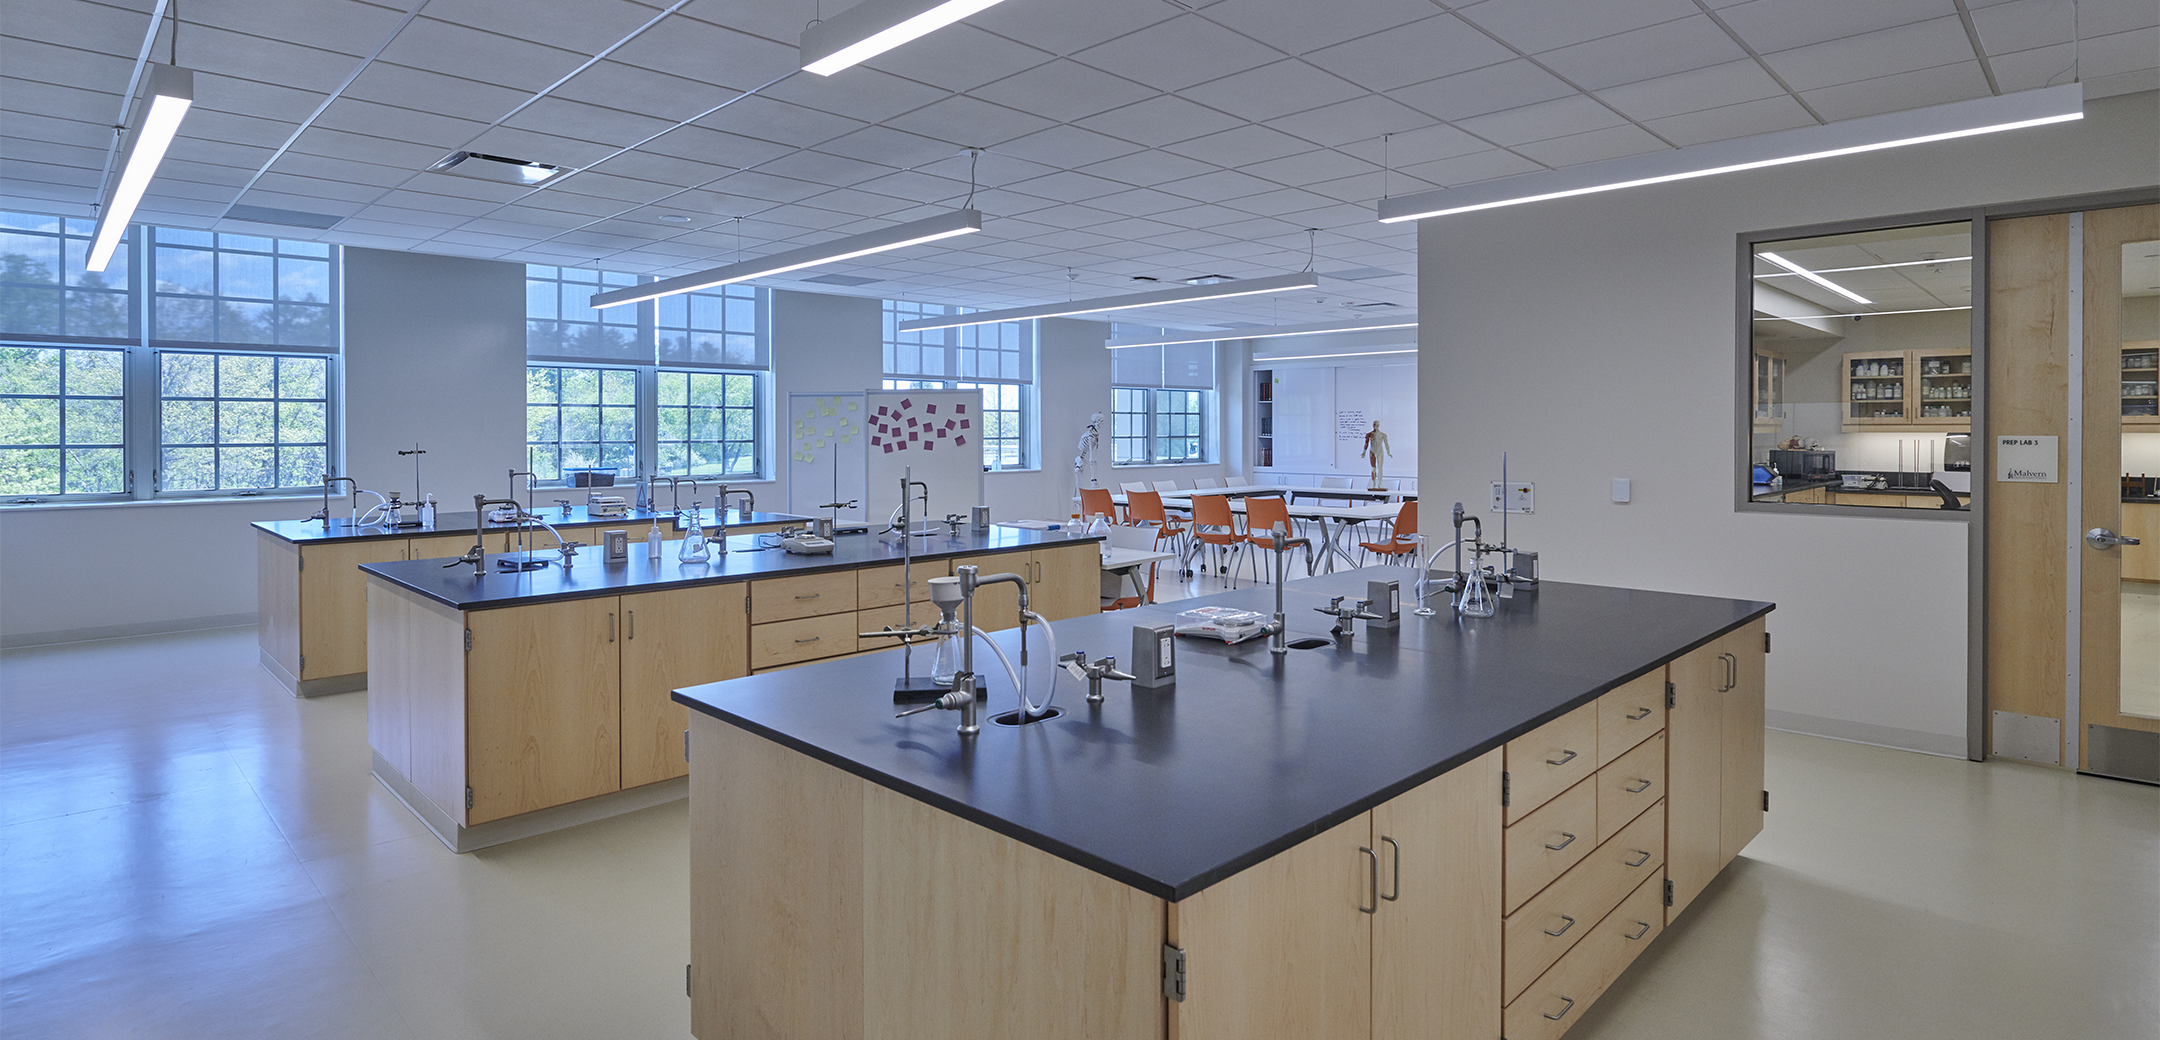 An interior view of the Malvern Prep school lab featuring clean white walls, flooring and lab faucets and equipment.